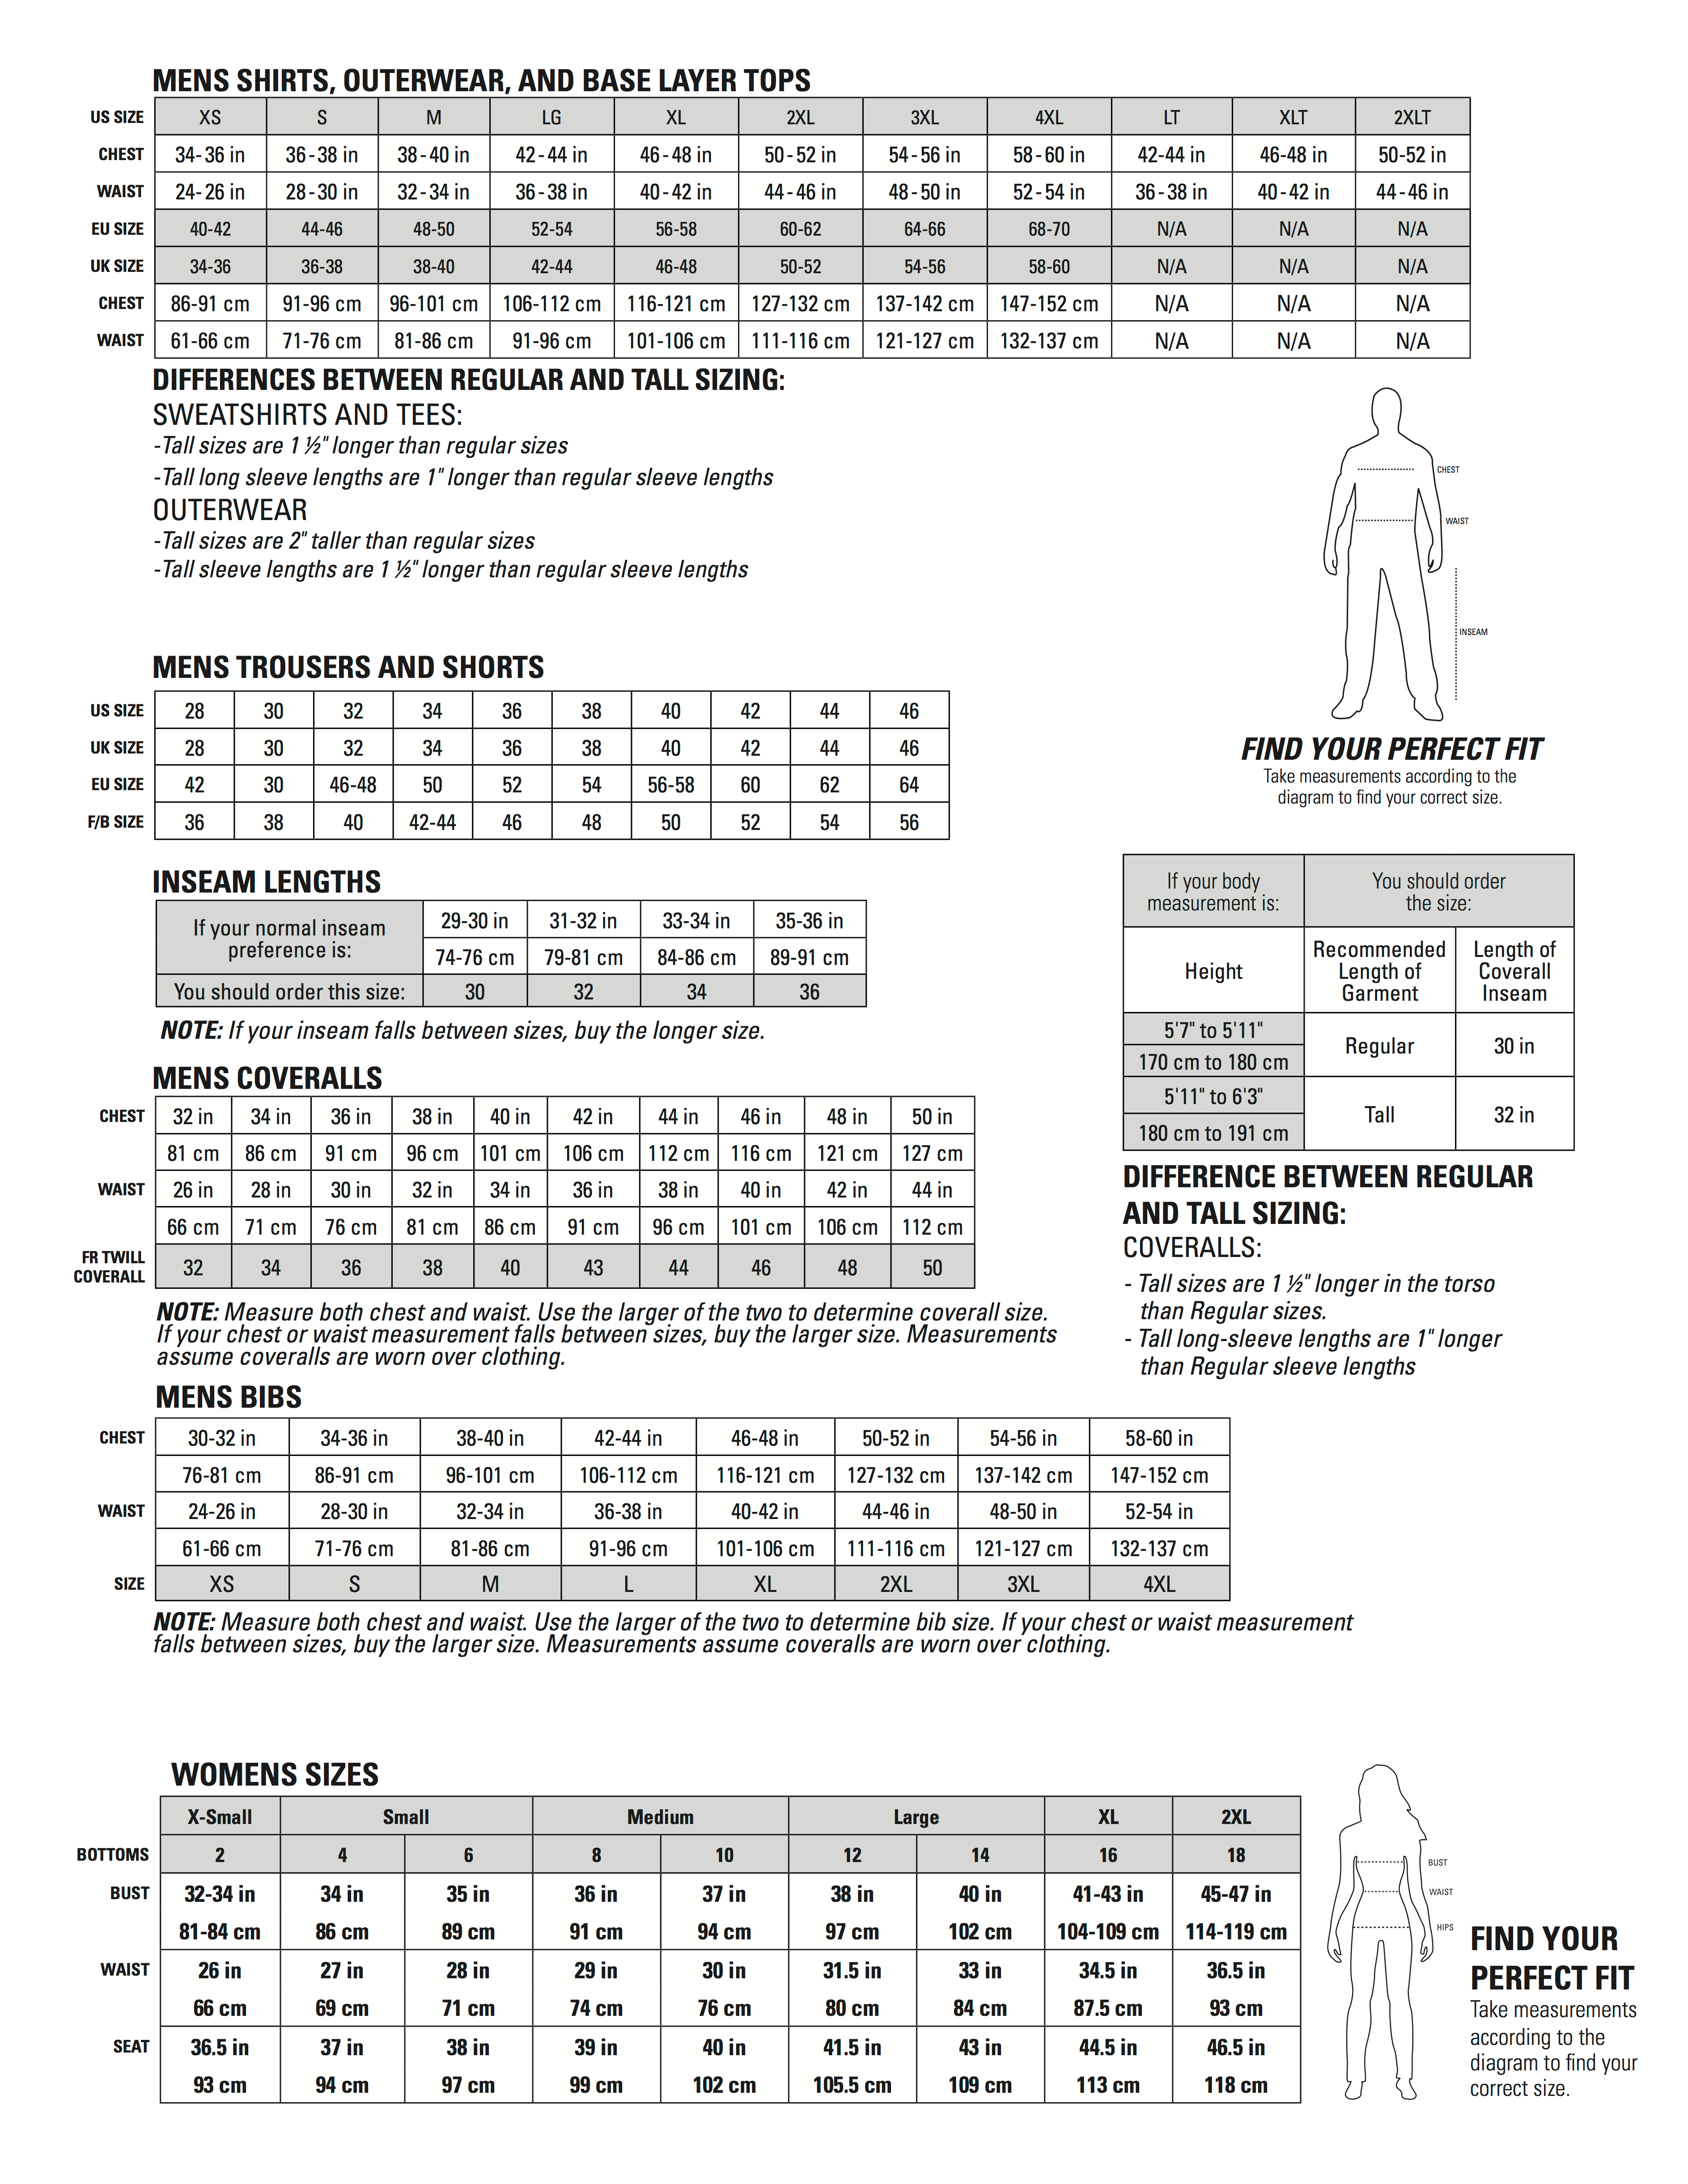 Sizing & Fit Guides - Cat Workwear - Caterpillar Workwear